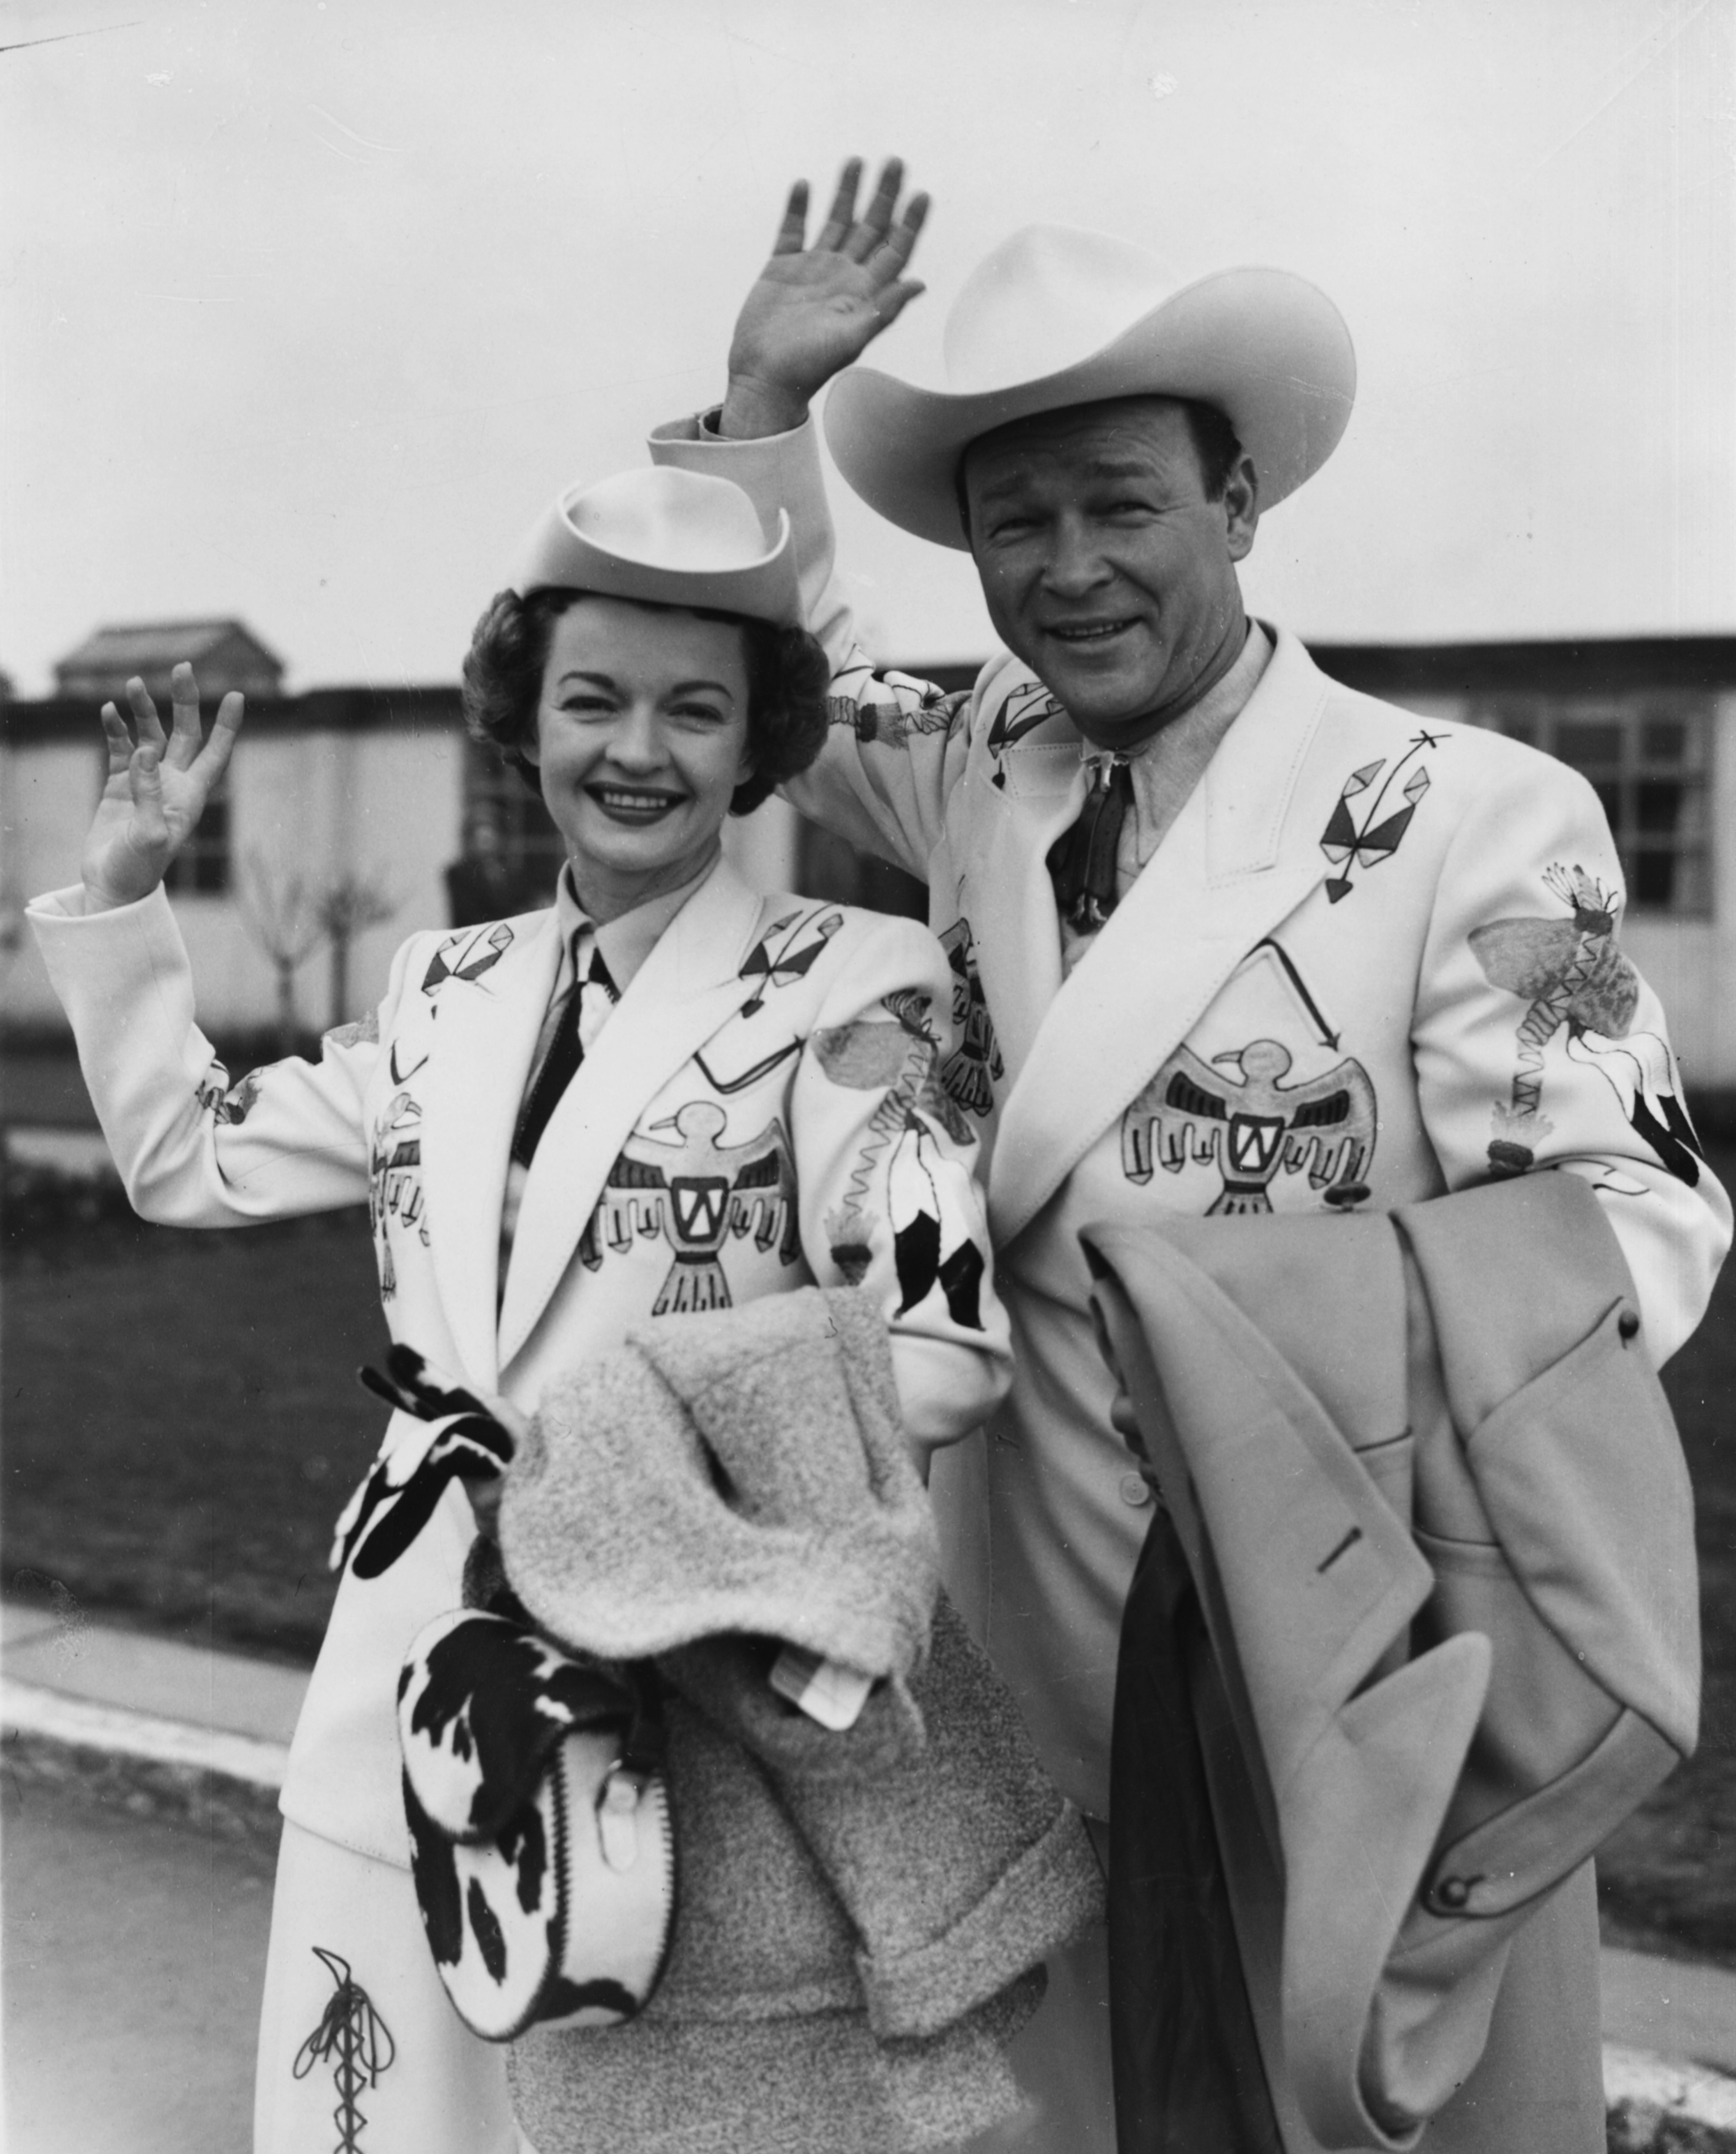  Roy Rogers, the 'King of Cowboys', and his wife Dale Evans in 'Wild West' costume, waving as they arrive at London Airport, February 10th 1954. | Source: Getty Images.